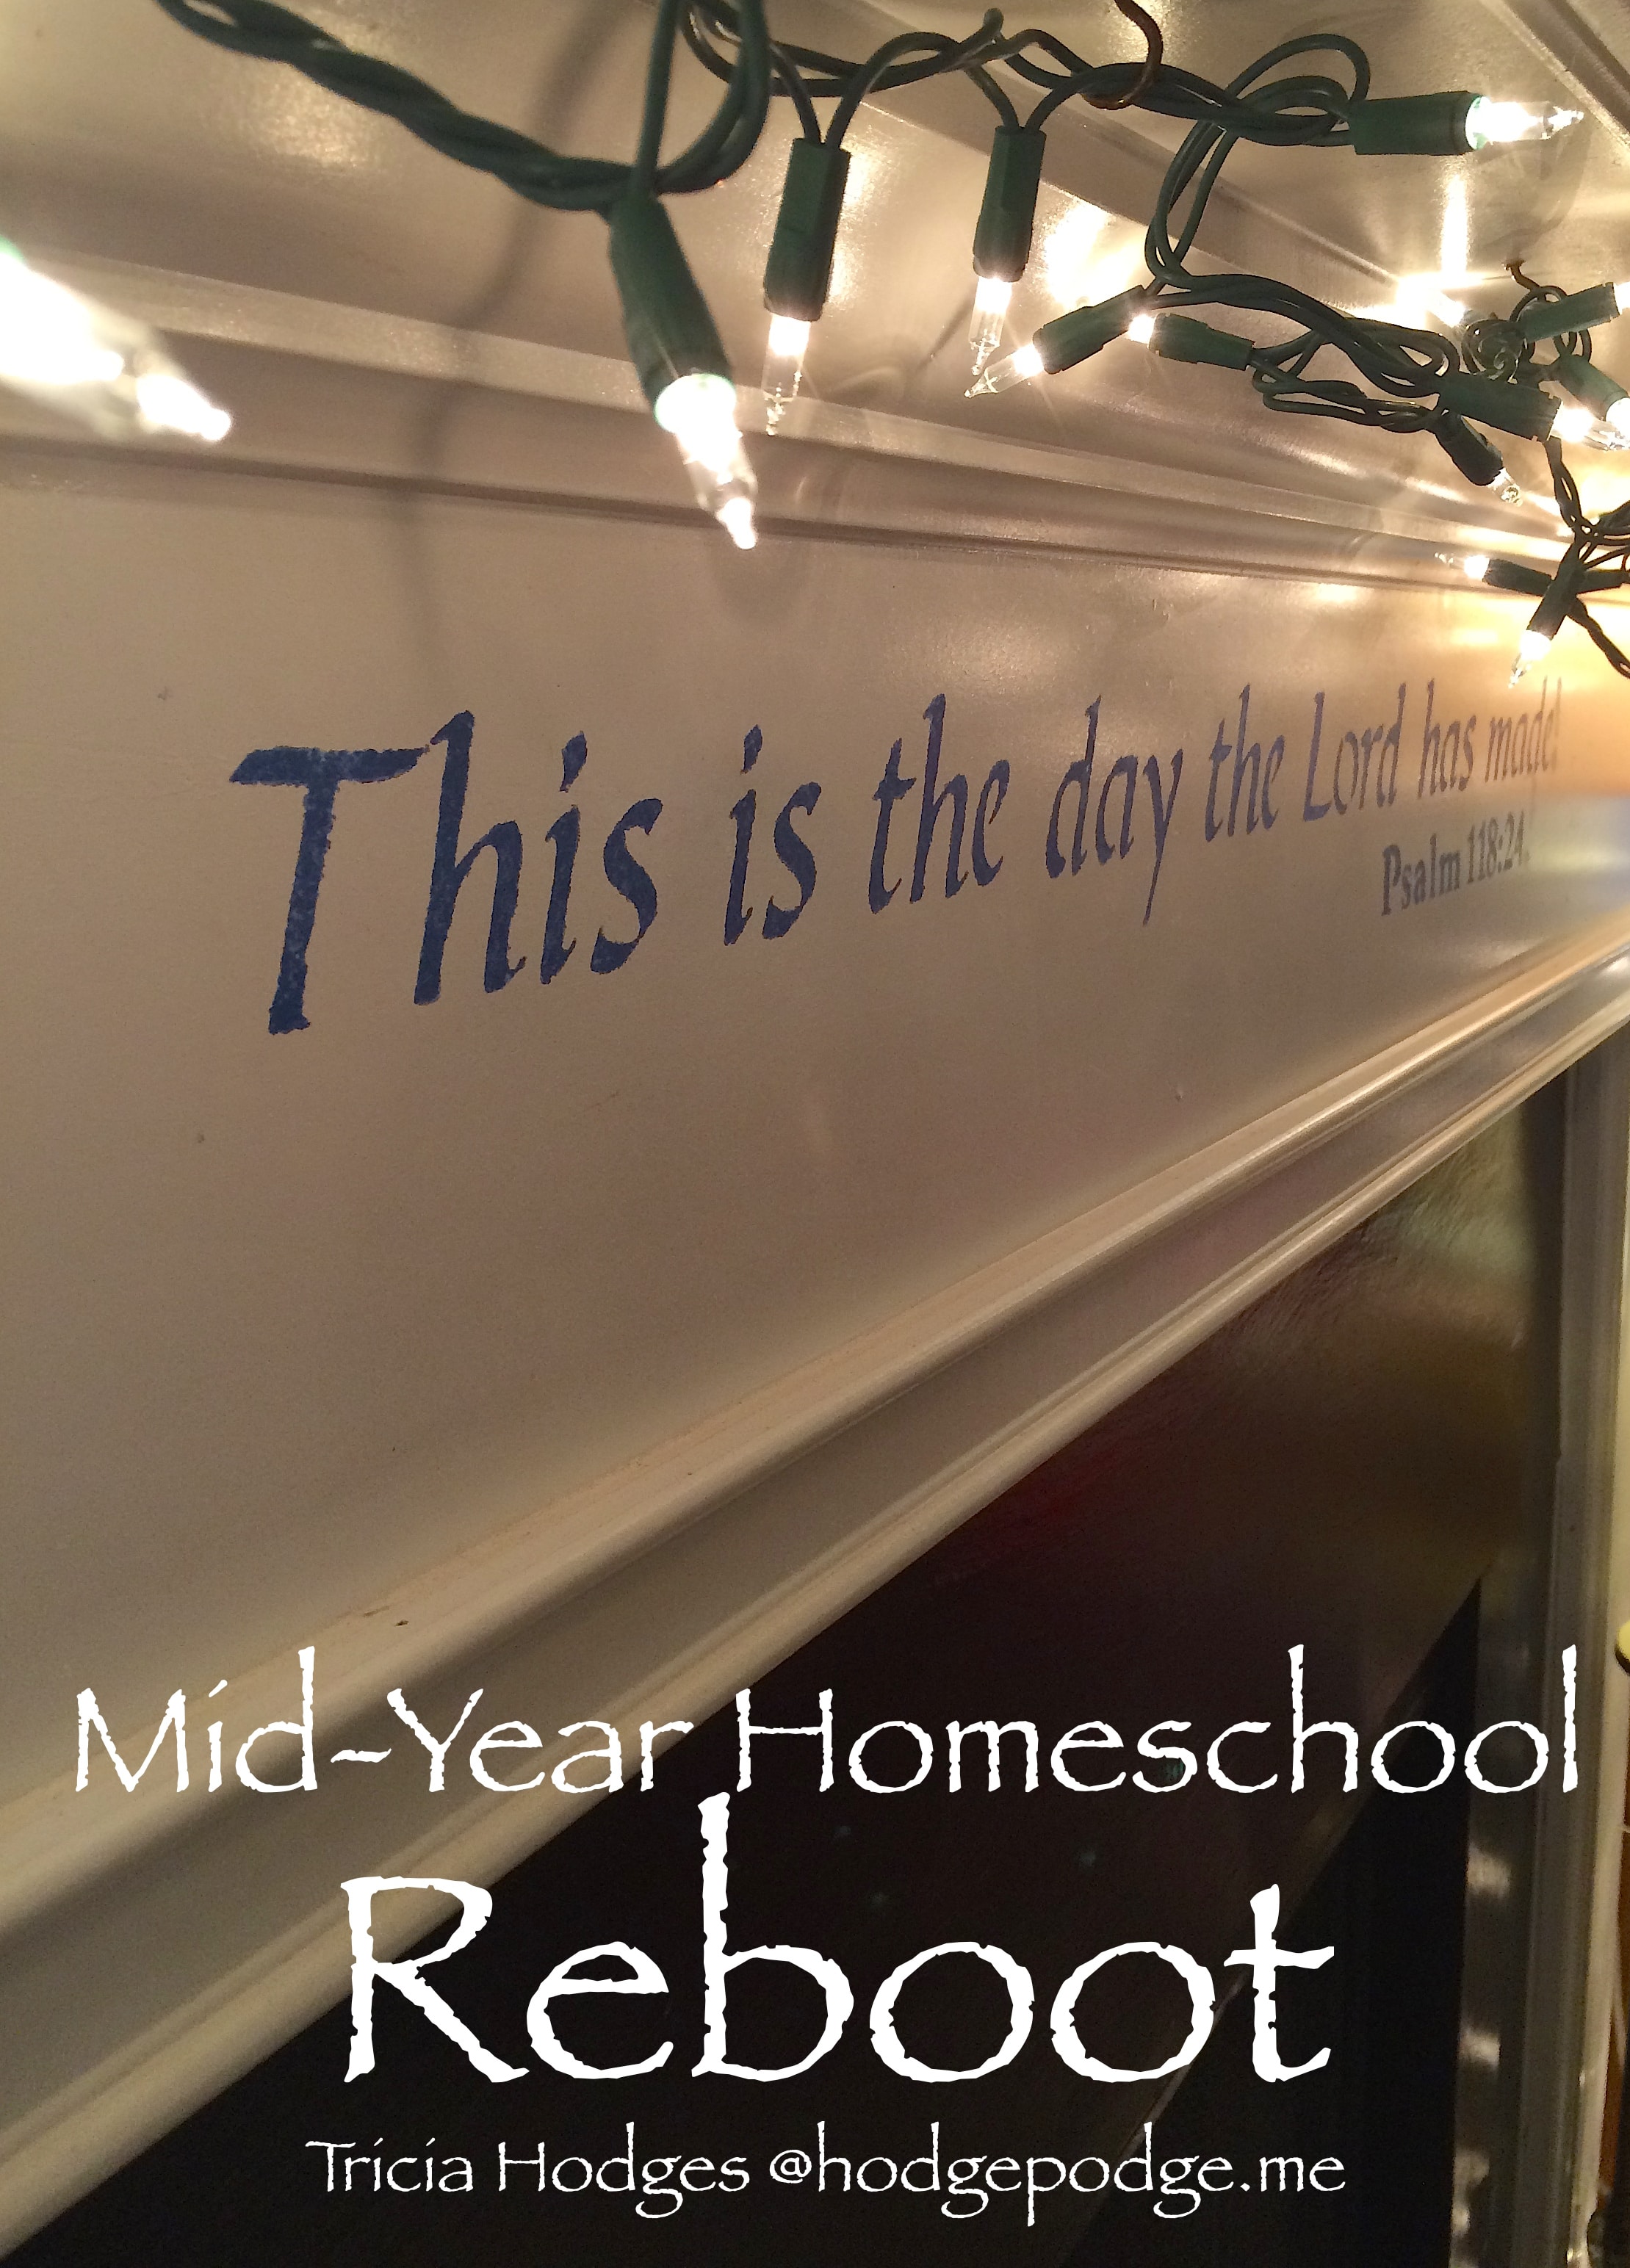 Does your family need a mid-year homeschool reboot? Enjoy these resources, ideas and the homeschool encouragement for a good restart.